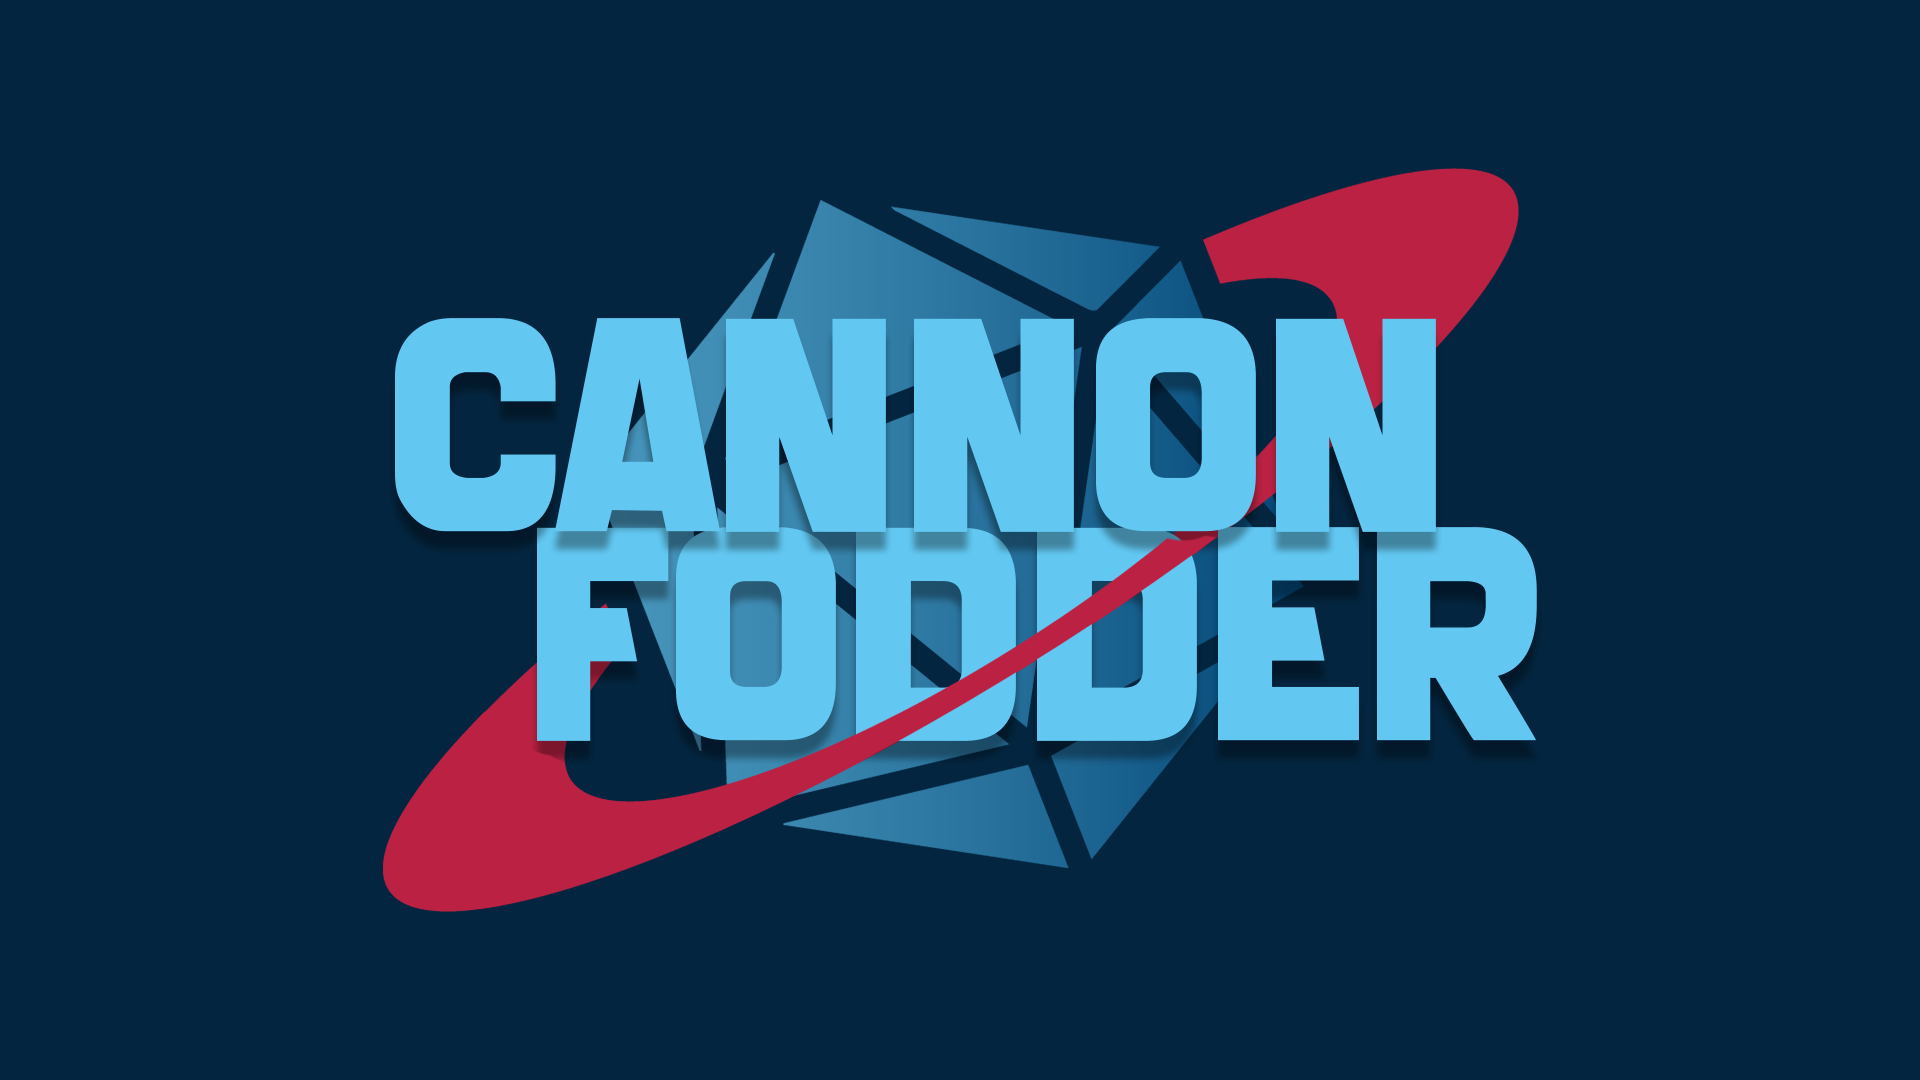 CANNON FODDER NEW 1920x1080 04.png